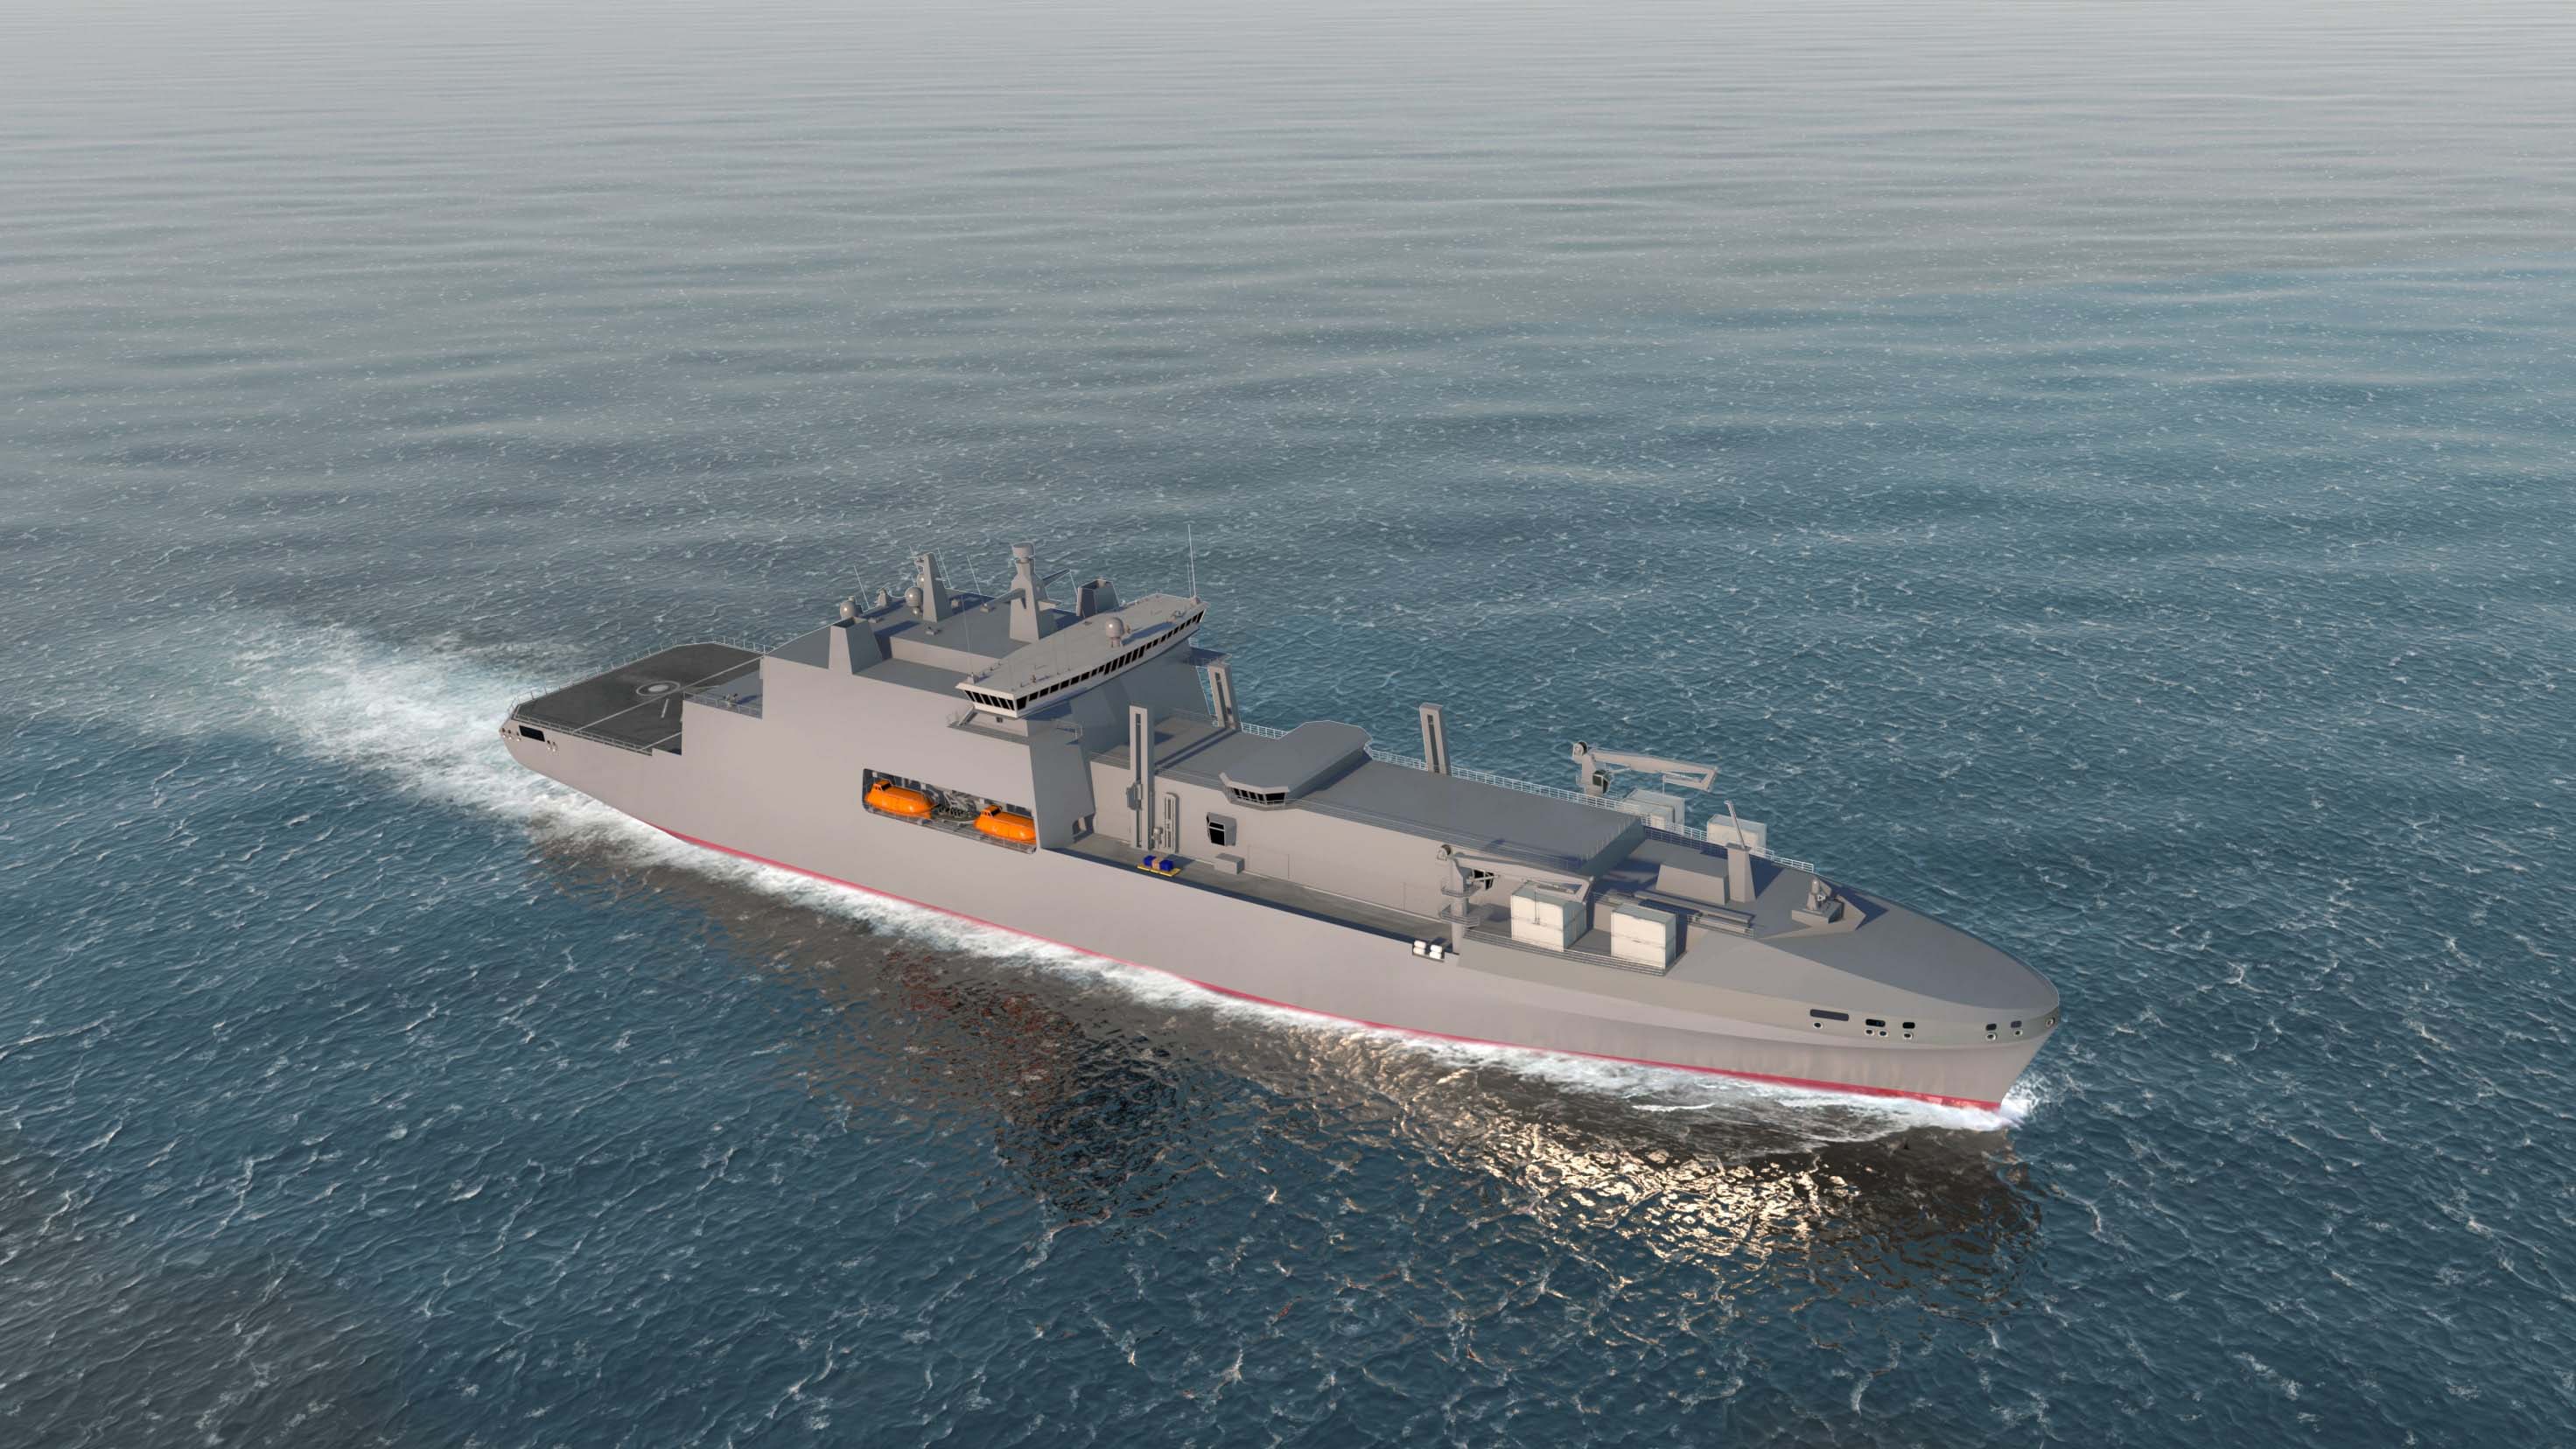 New ships to support Royal Navy carrier groups